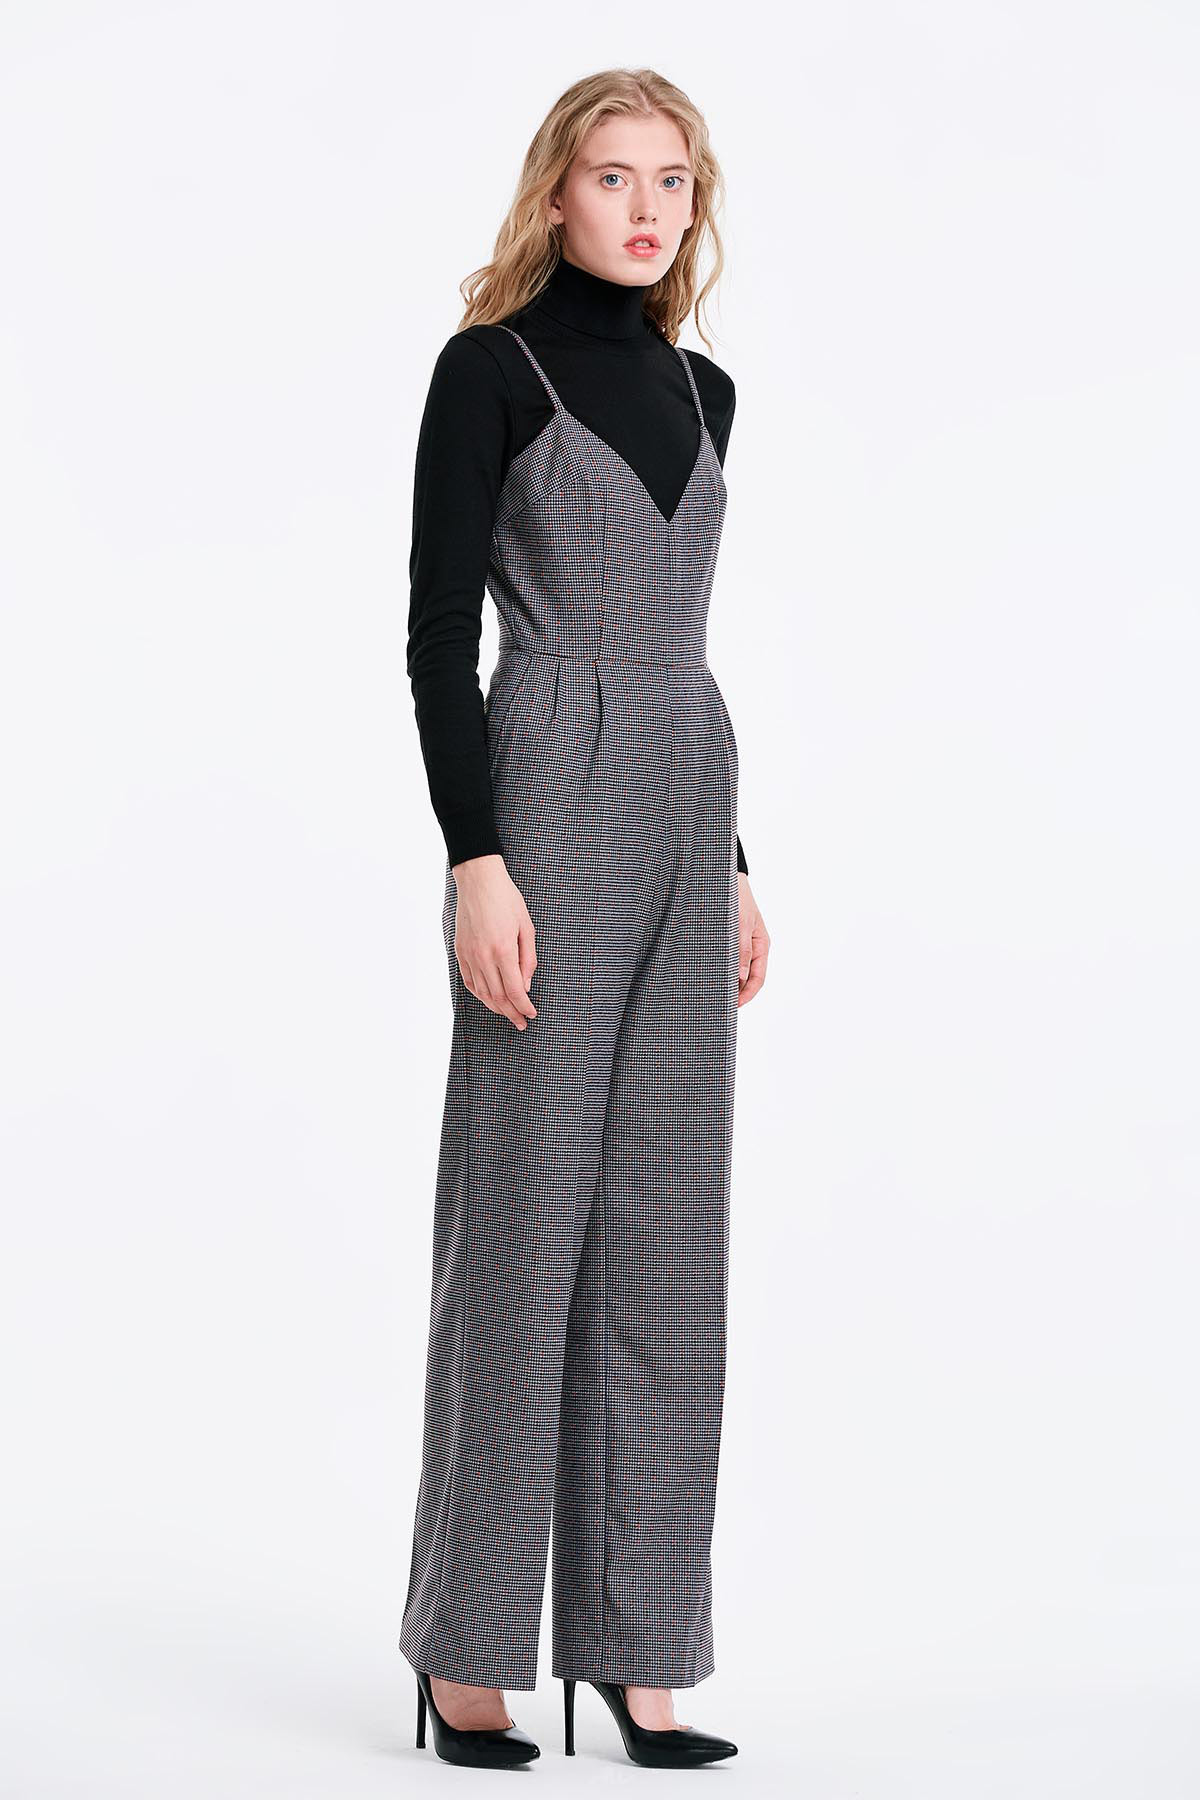 Grey jumpsuit with a houndstooth print, photo 2